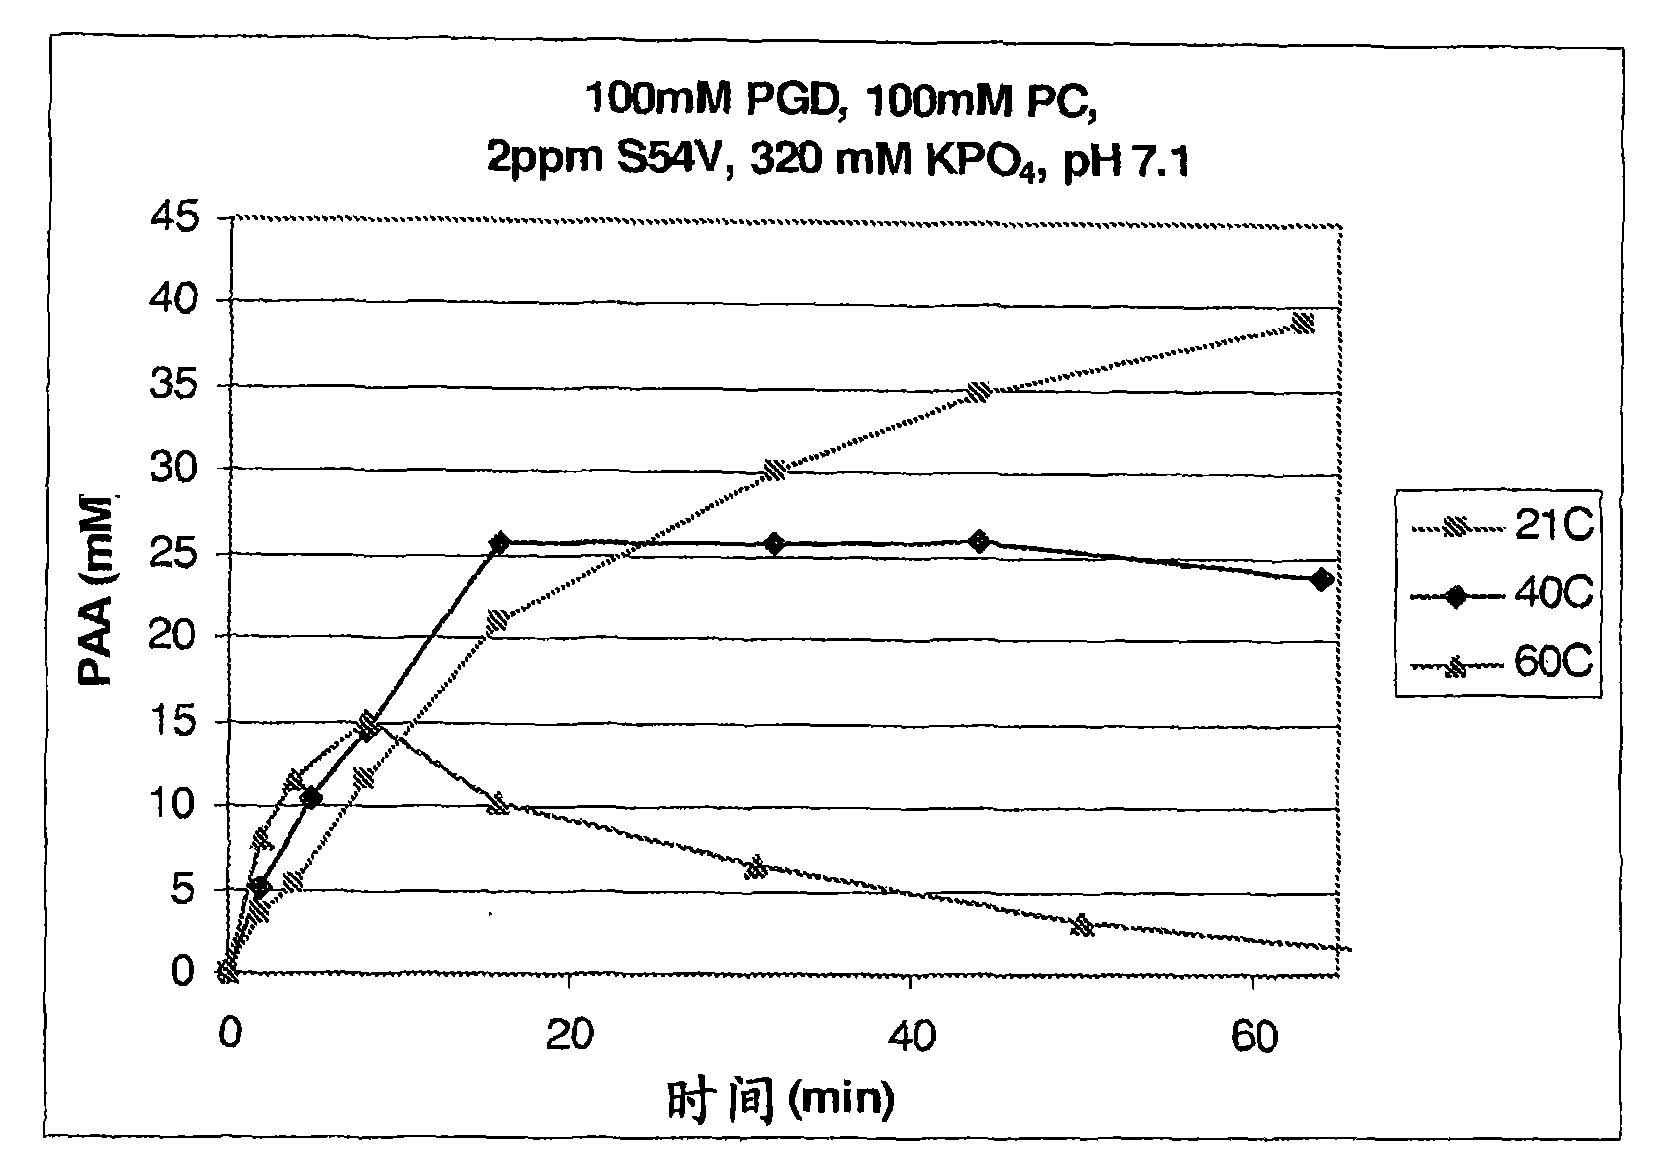 Stable enzymatic peracid generating systems